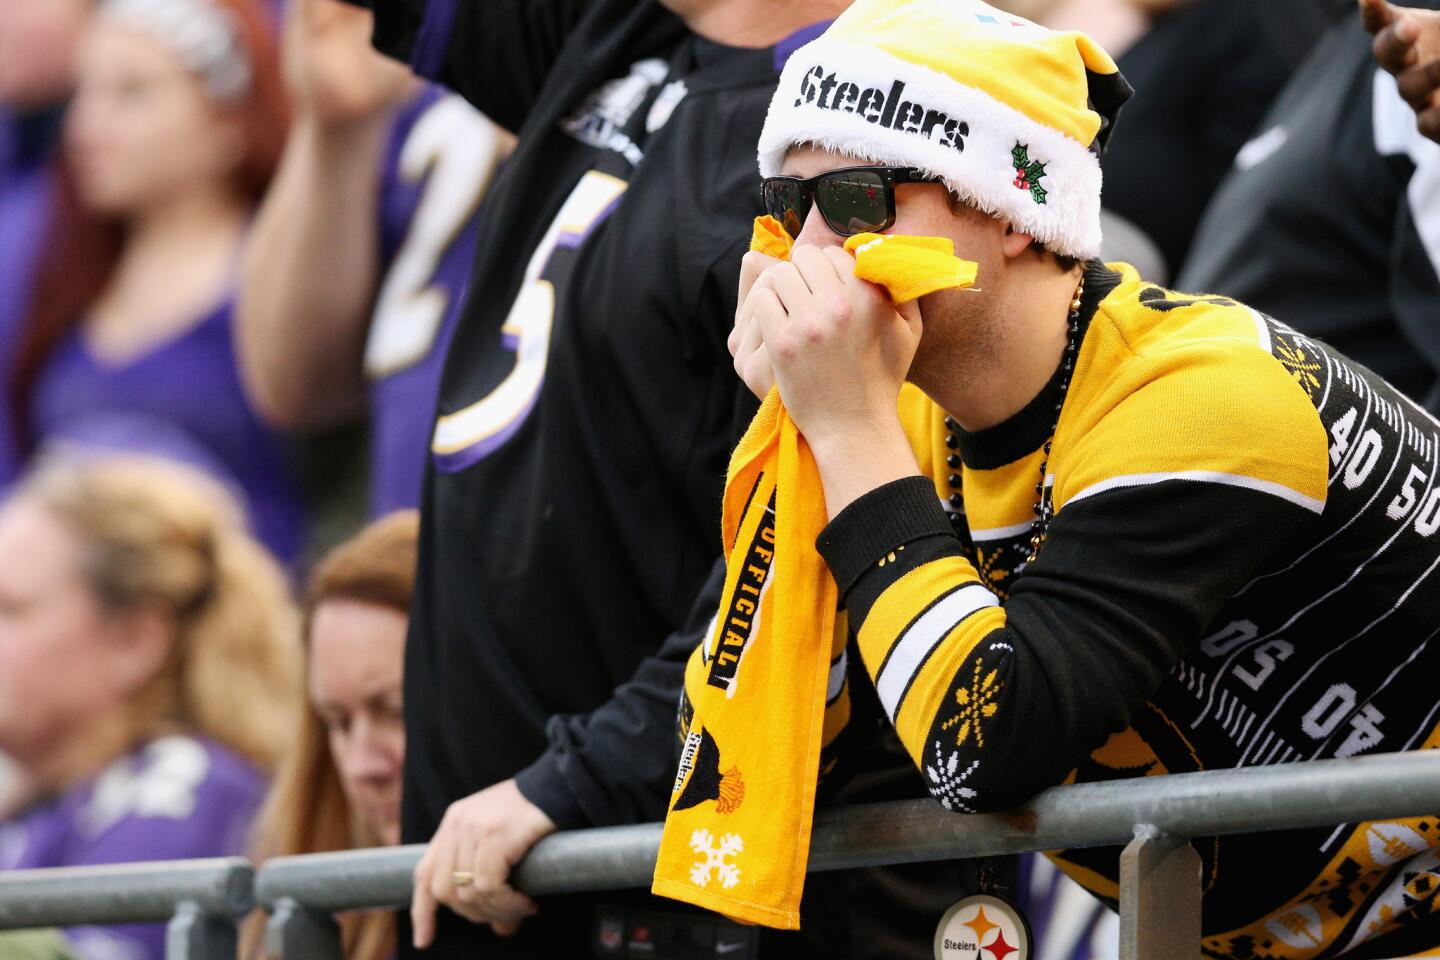 A Pittsburgh Steelers fan reacts during the fourth quarter against the Baltimore Ravens at M&T Bank Stadium on December 27, 2015. The Ravens, with only four wins prior, created havoc for the Steelers' playoff chances with a stunning 20-17 win.